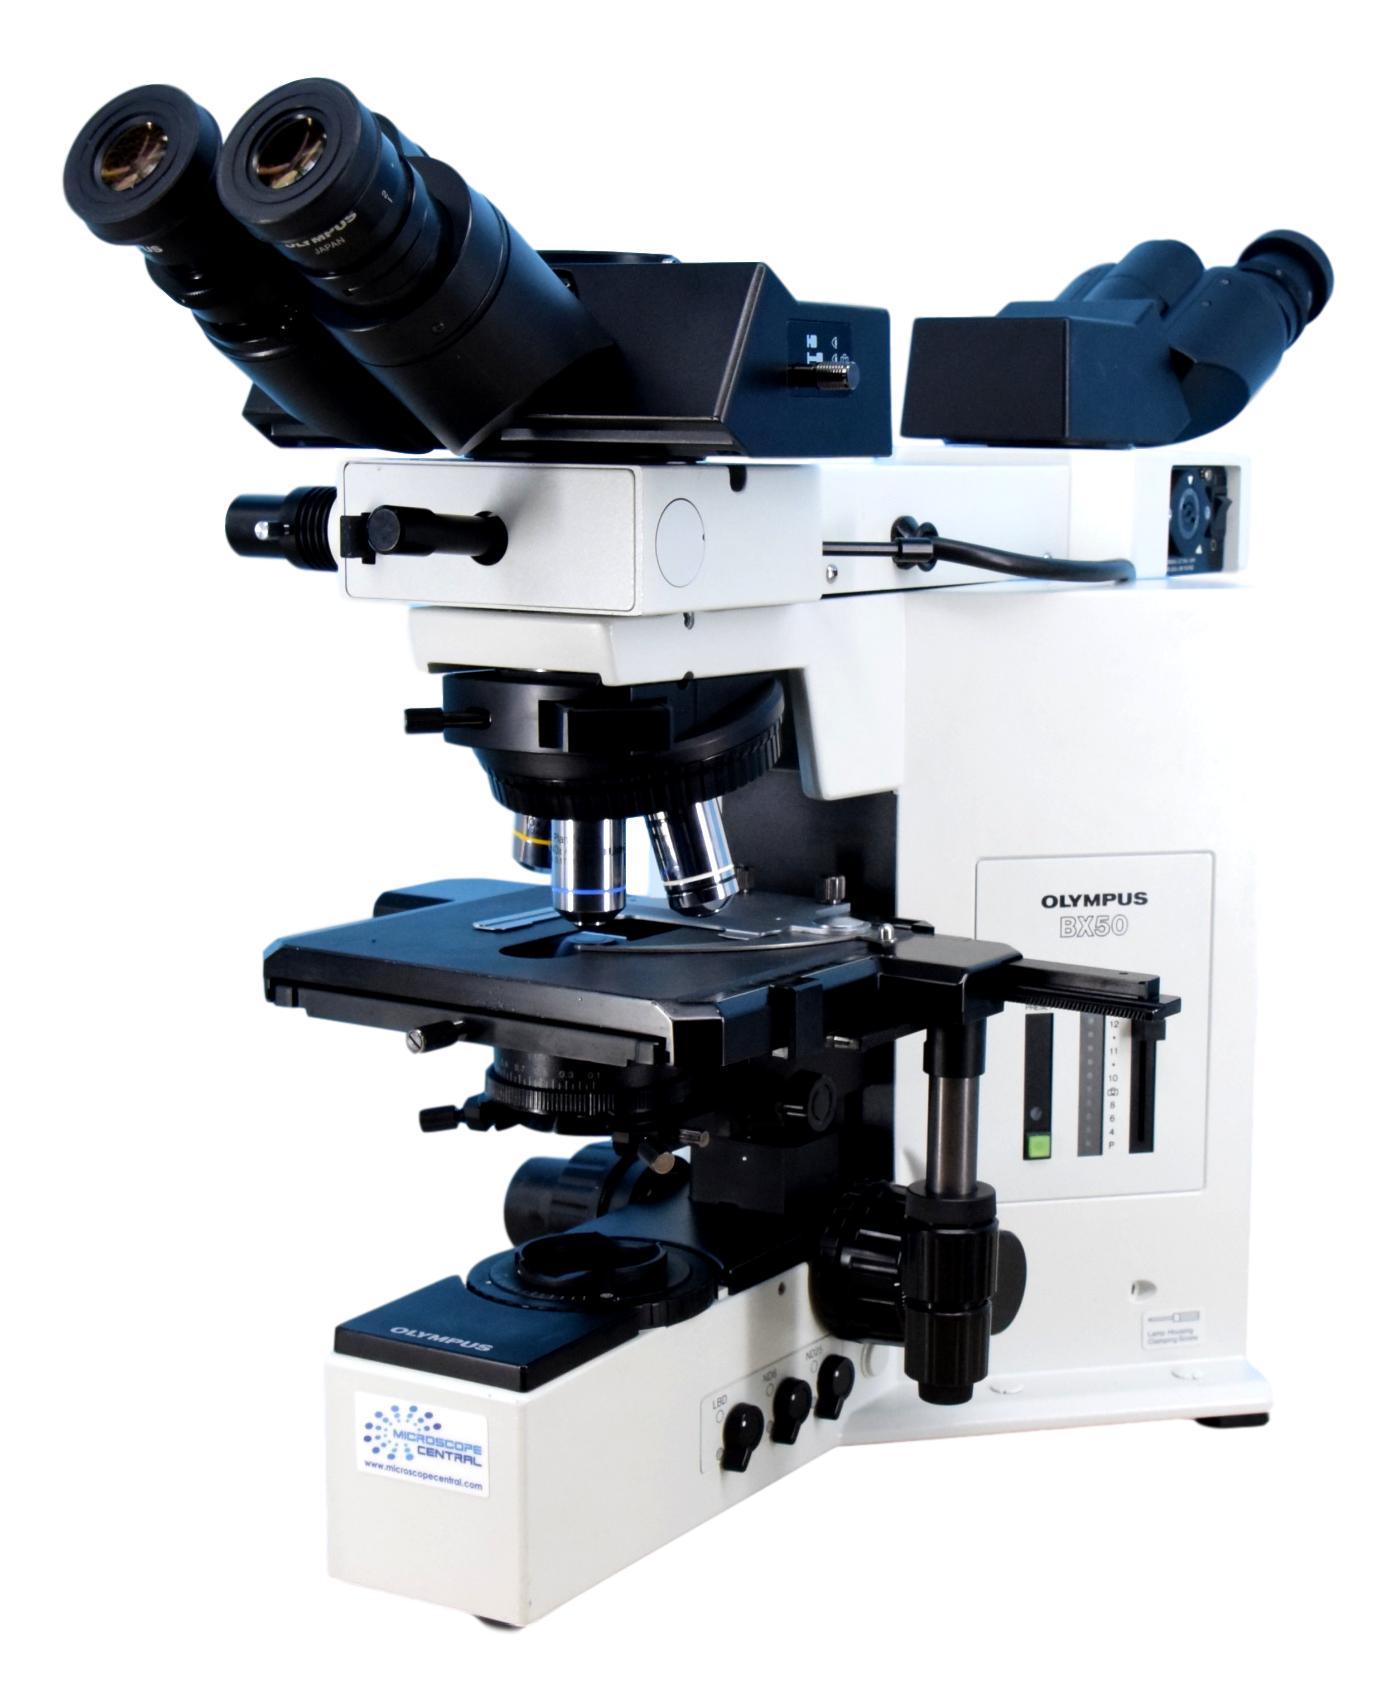 Olympus BX50 Dual Viewing Face-To-Face Microscope